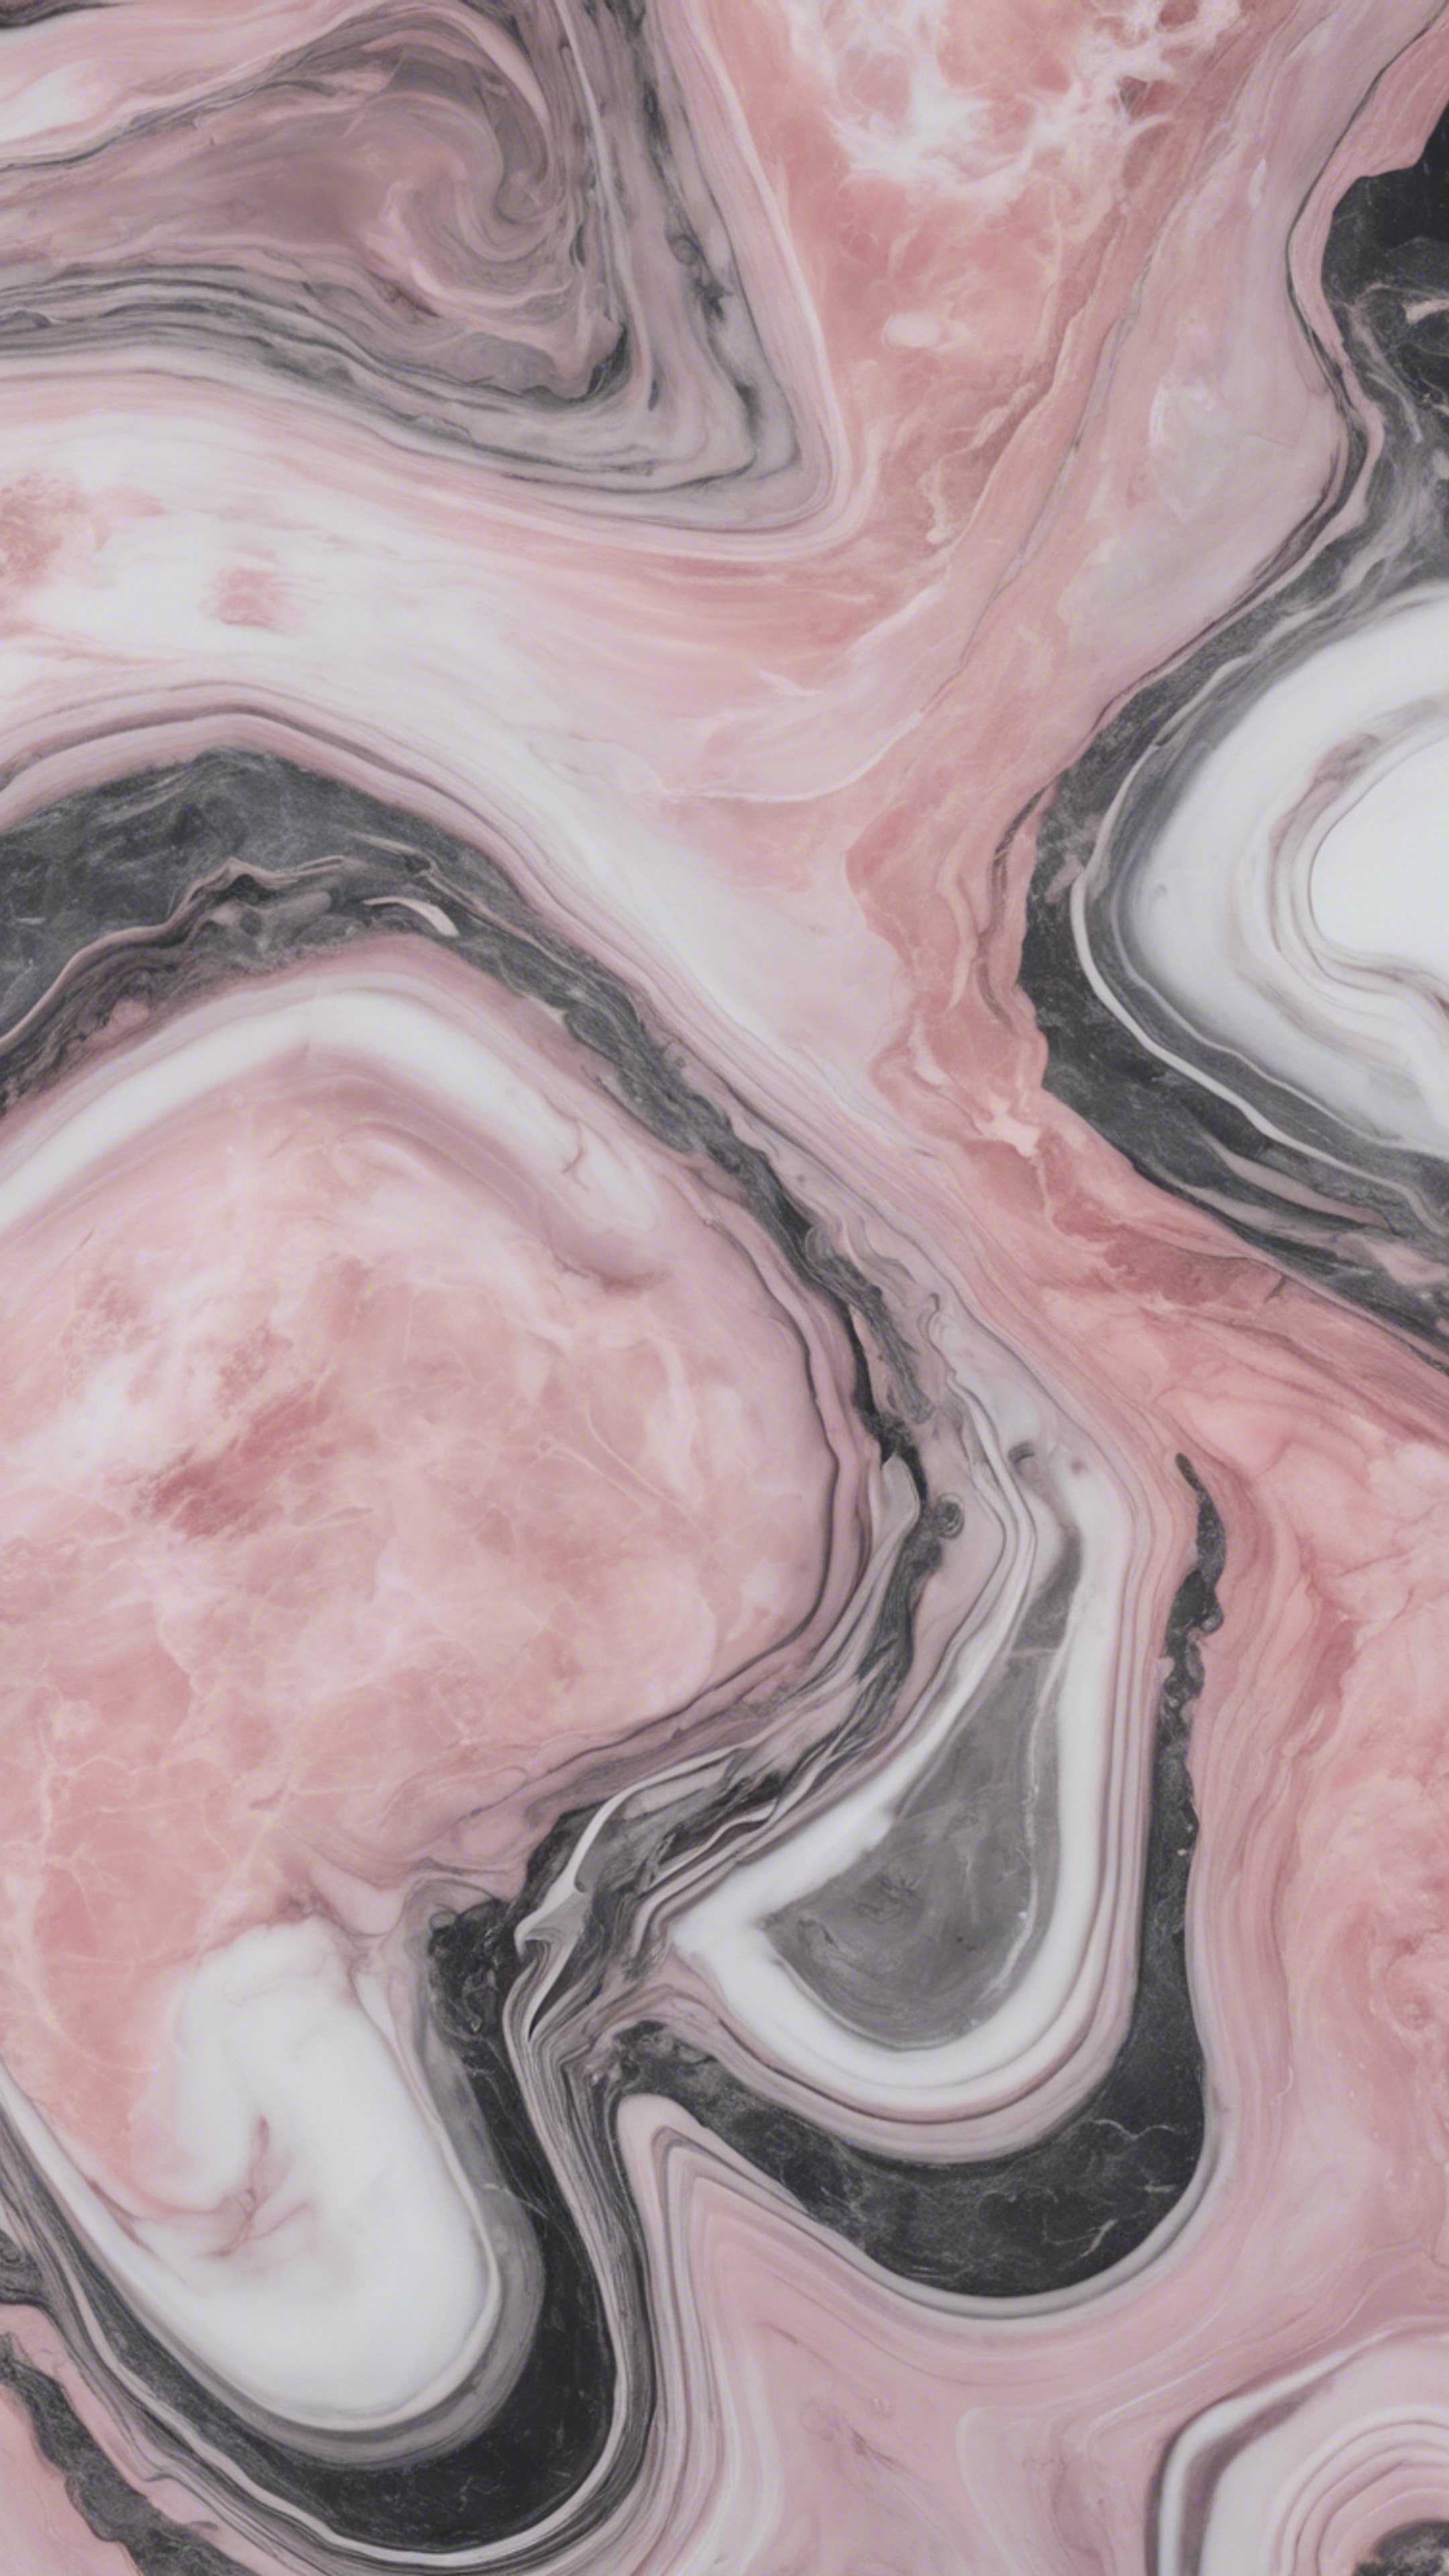 A swirling pattern of pink, white, and charcoal grey characteristic of polished pink marble. duvar kağıdı[fb90daec103040ffbaff]